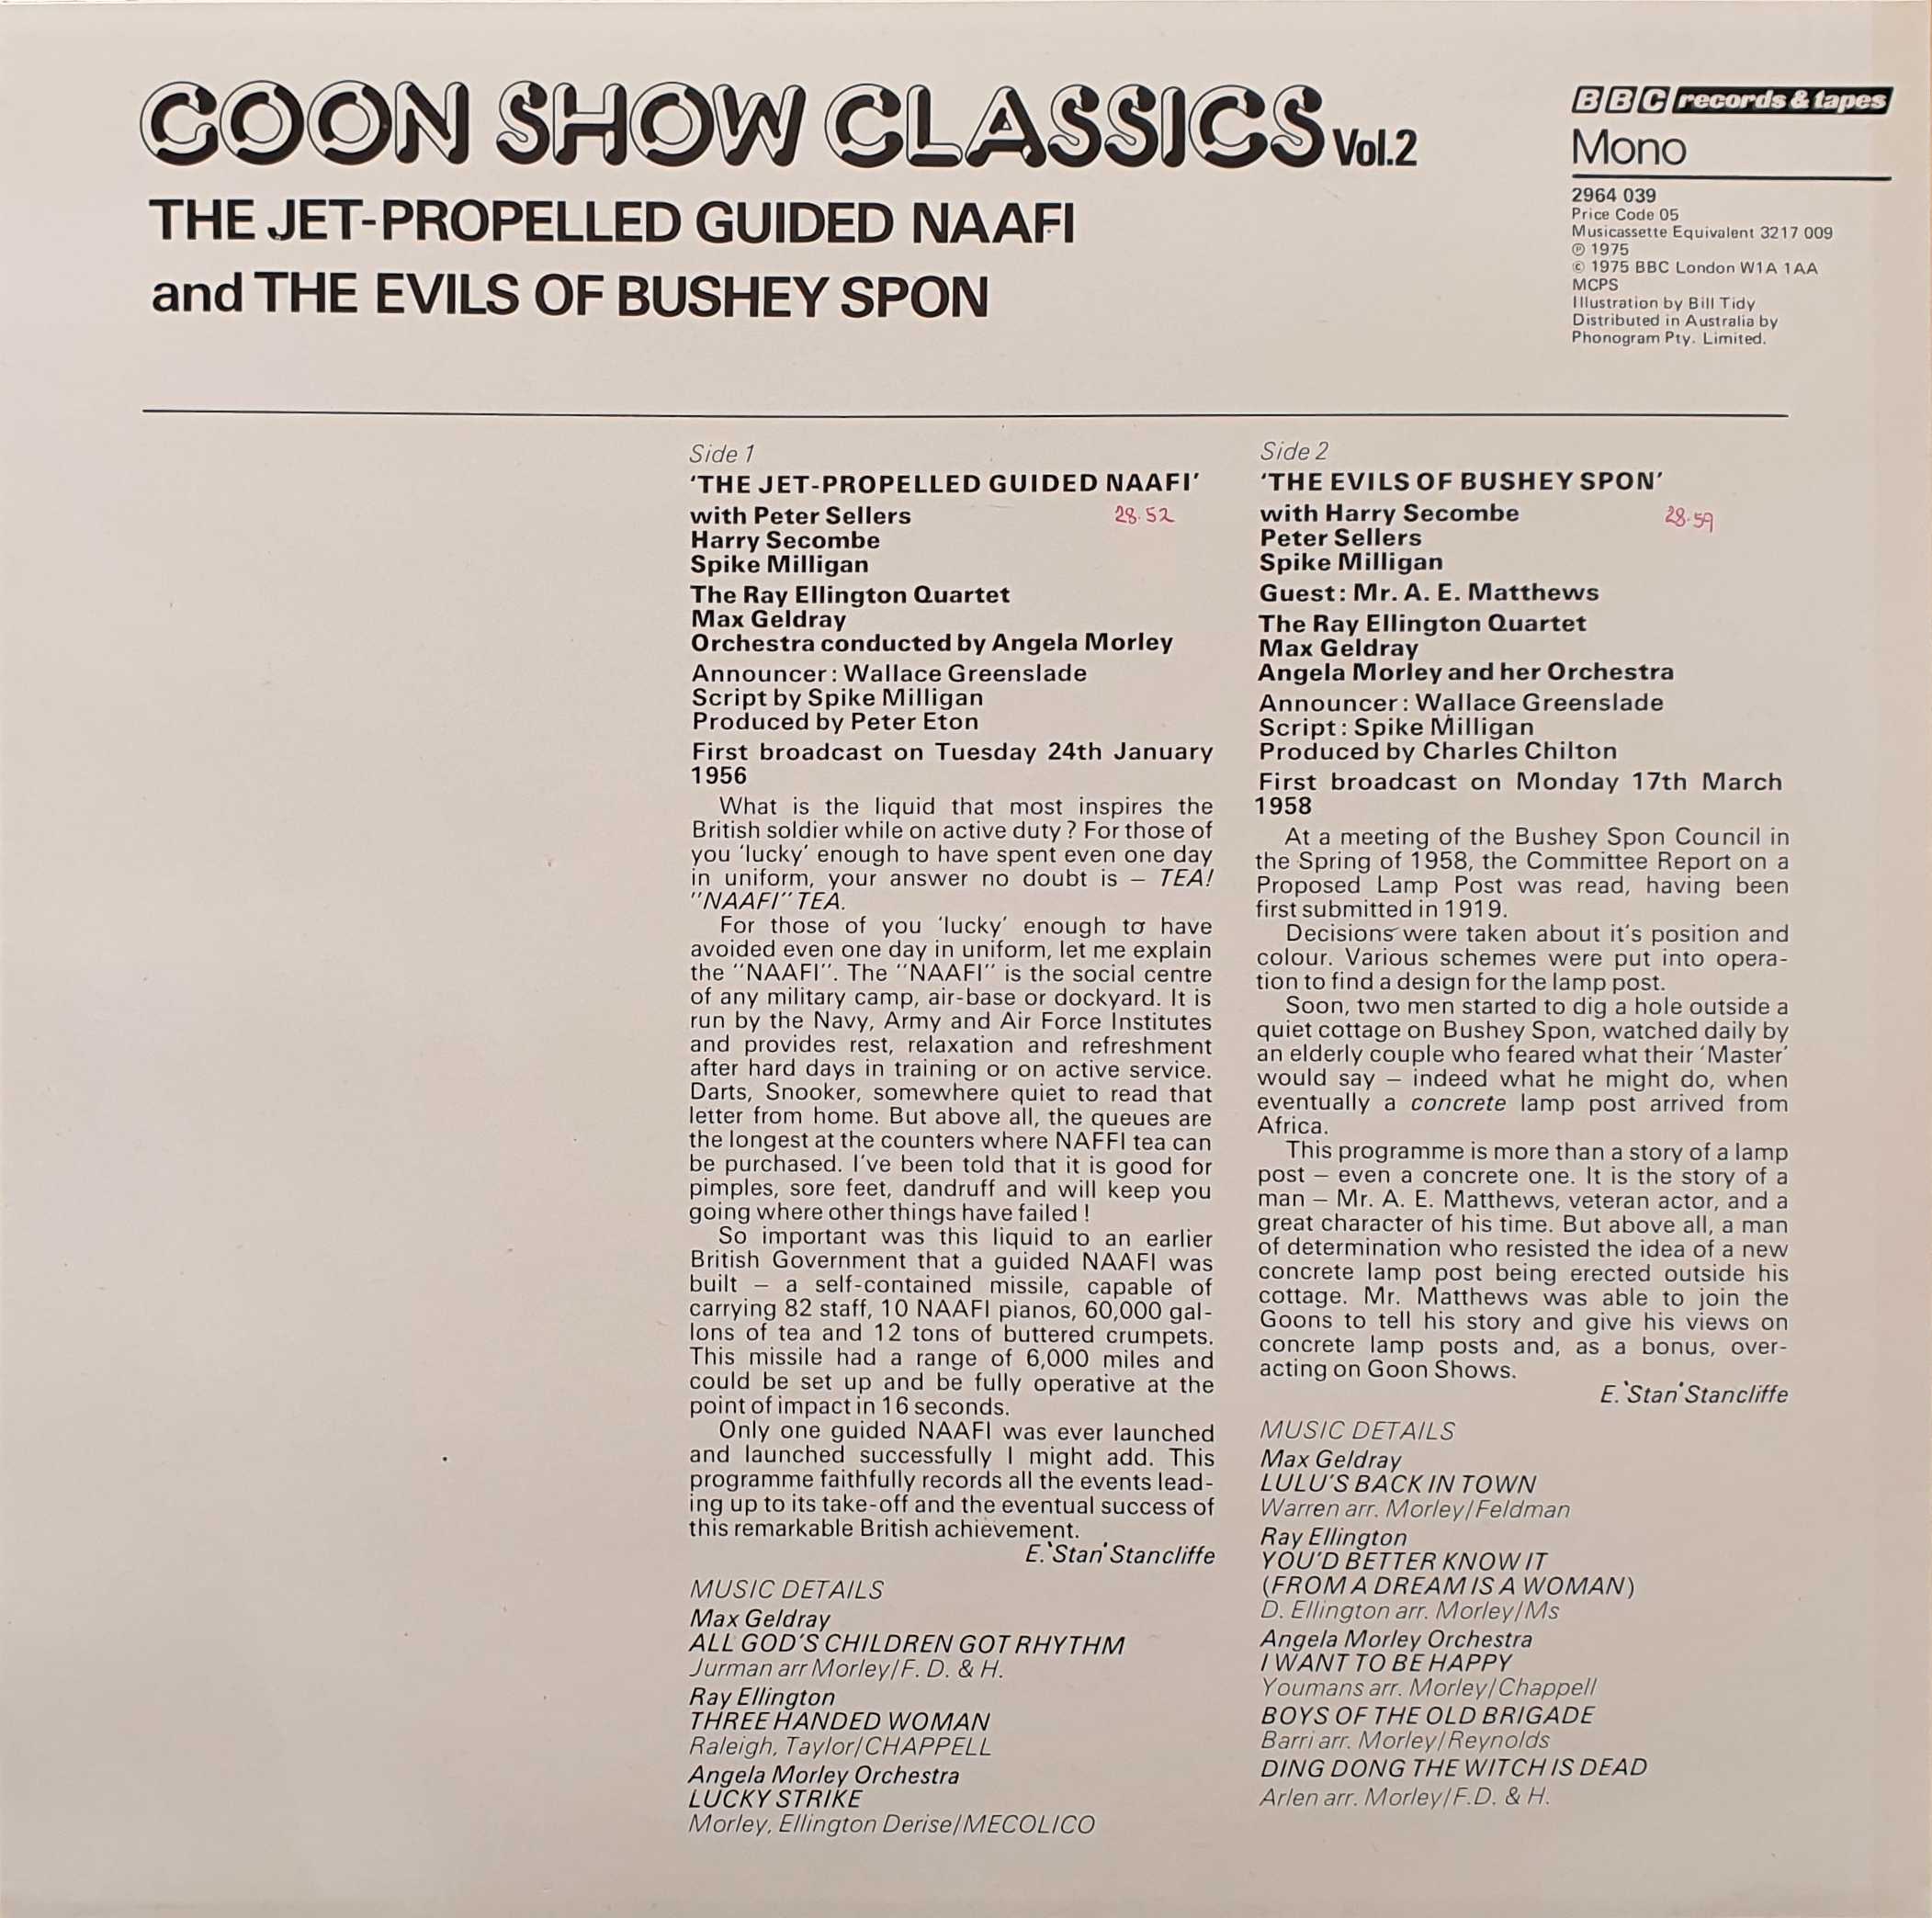 Picture of 2964 039 Goon Show classics vol. 2 by artist The Goon Show from the BBC records and Tapes library